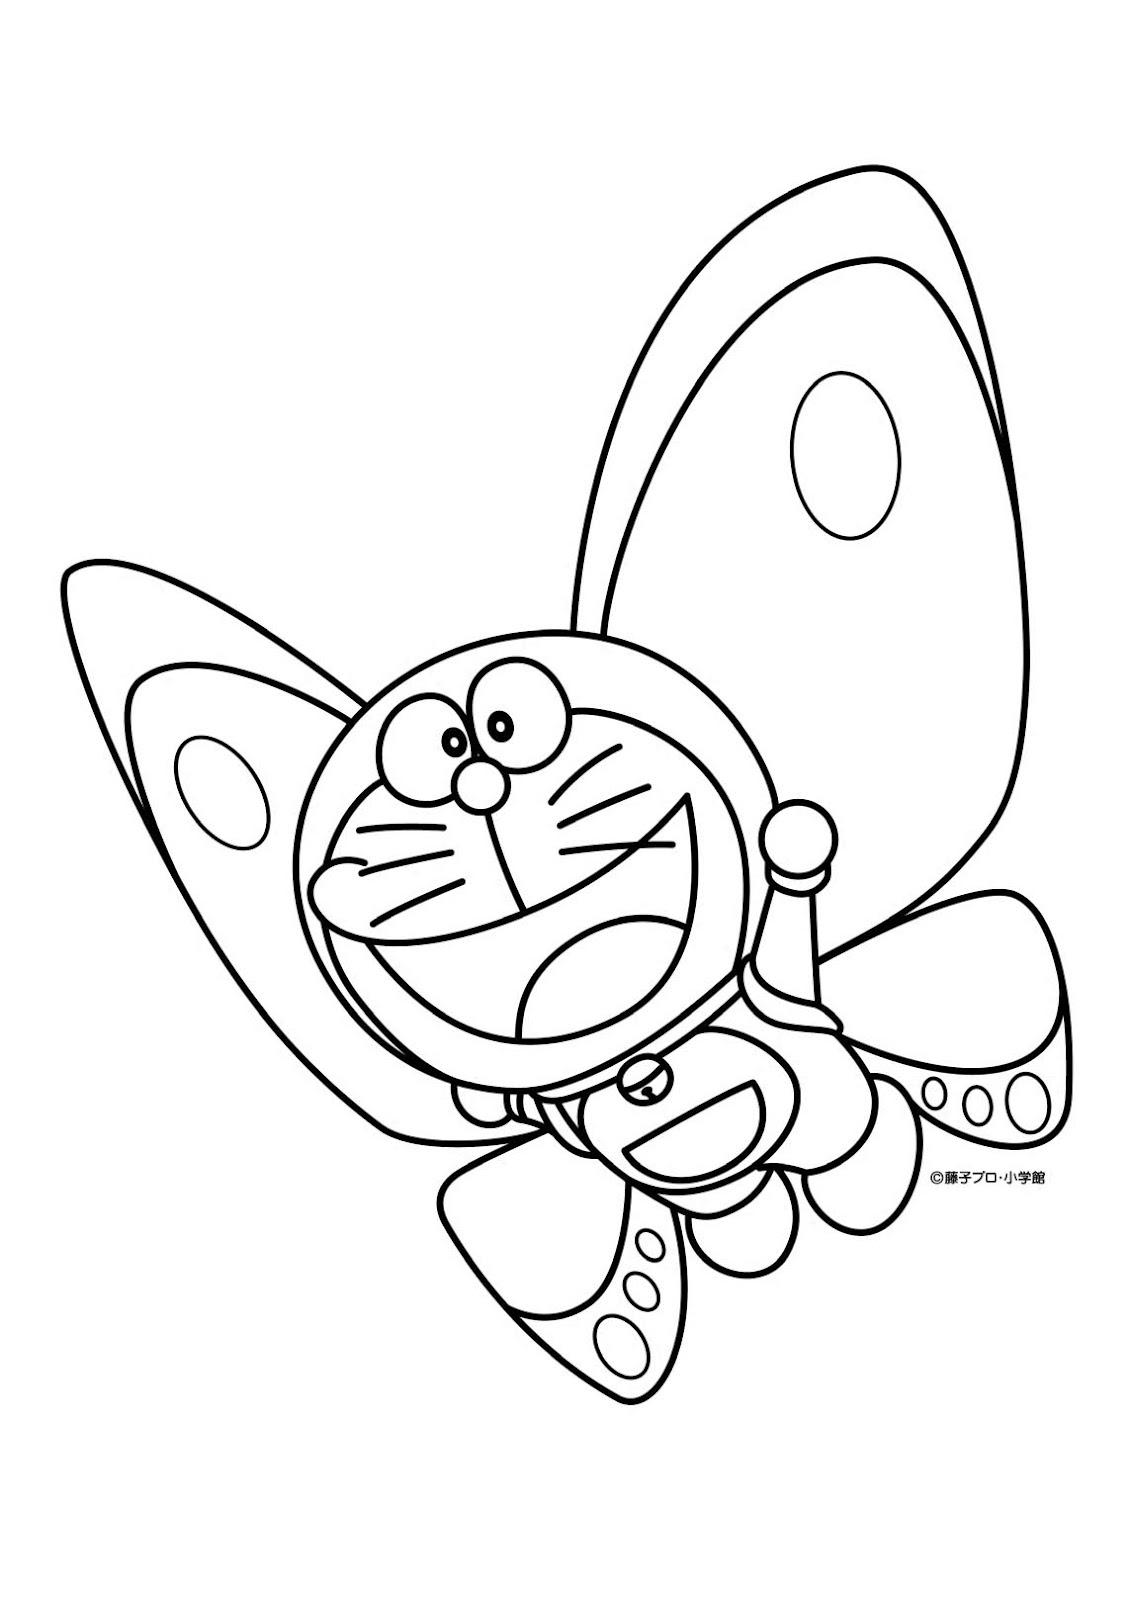 Butterfly Doraemon Coloring Page